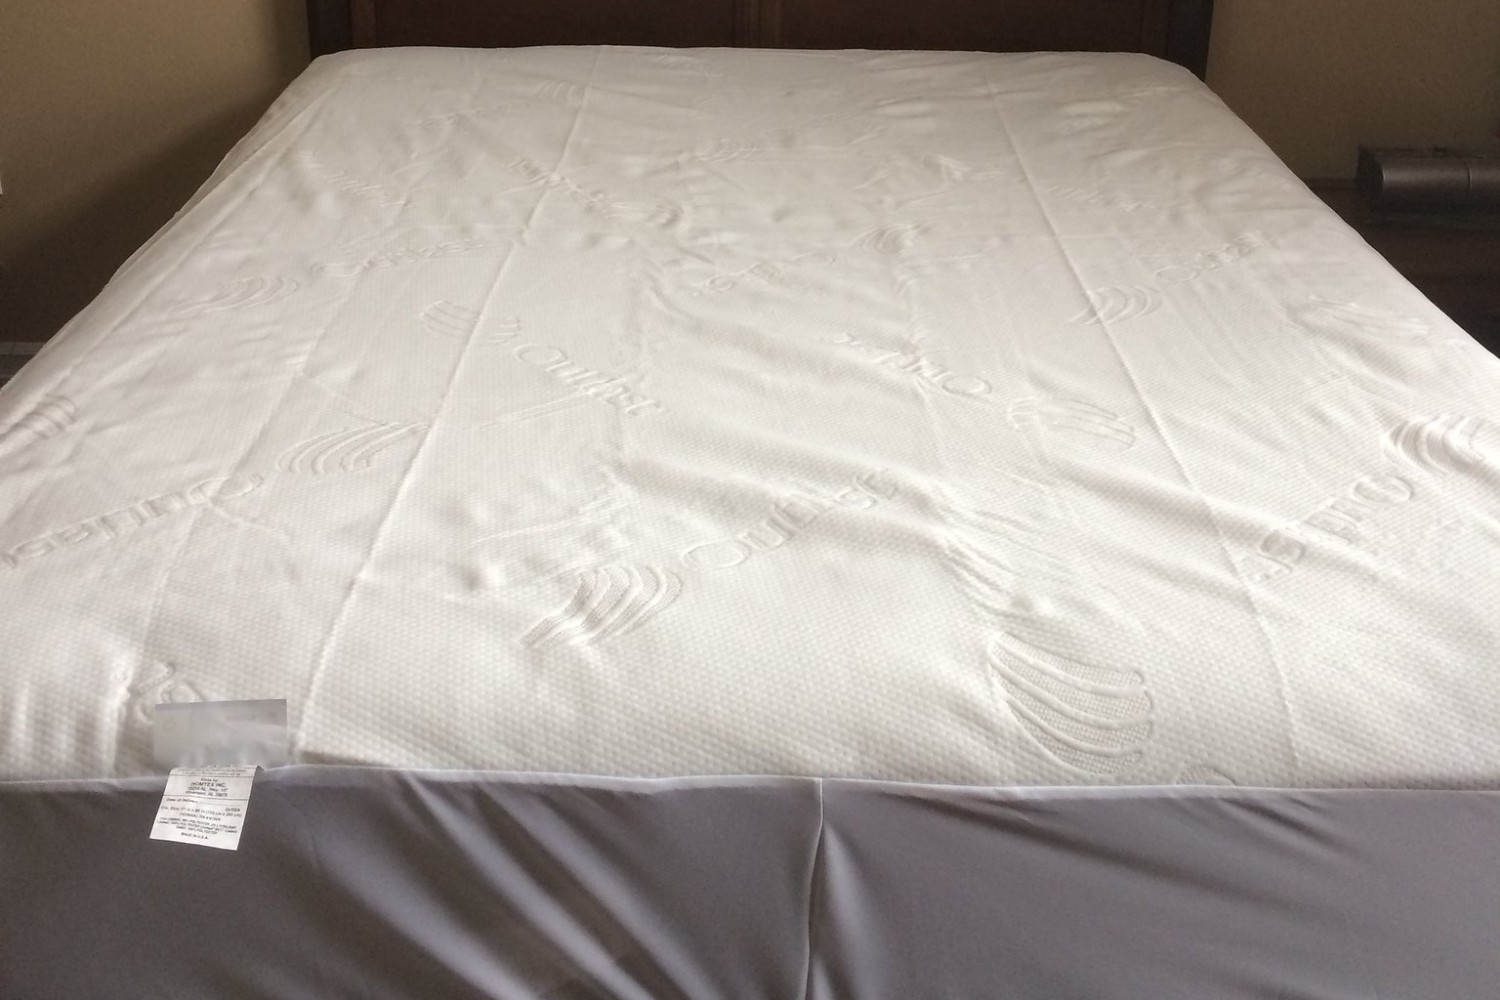 https://www.themanual.com/wp-content/uploads/sites/9/2021/11/mattress-protector-on-a-bed.jpg?fit=1500%2C1000&p=1